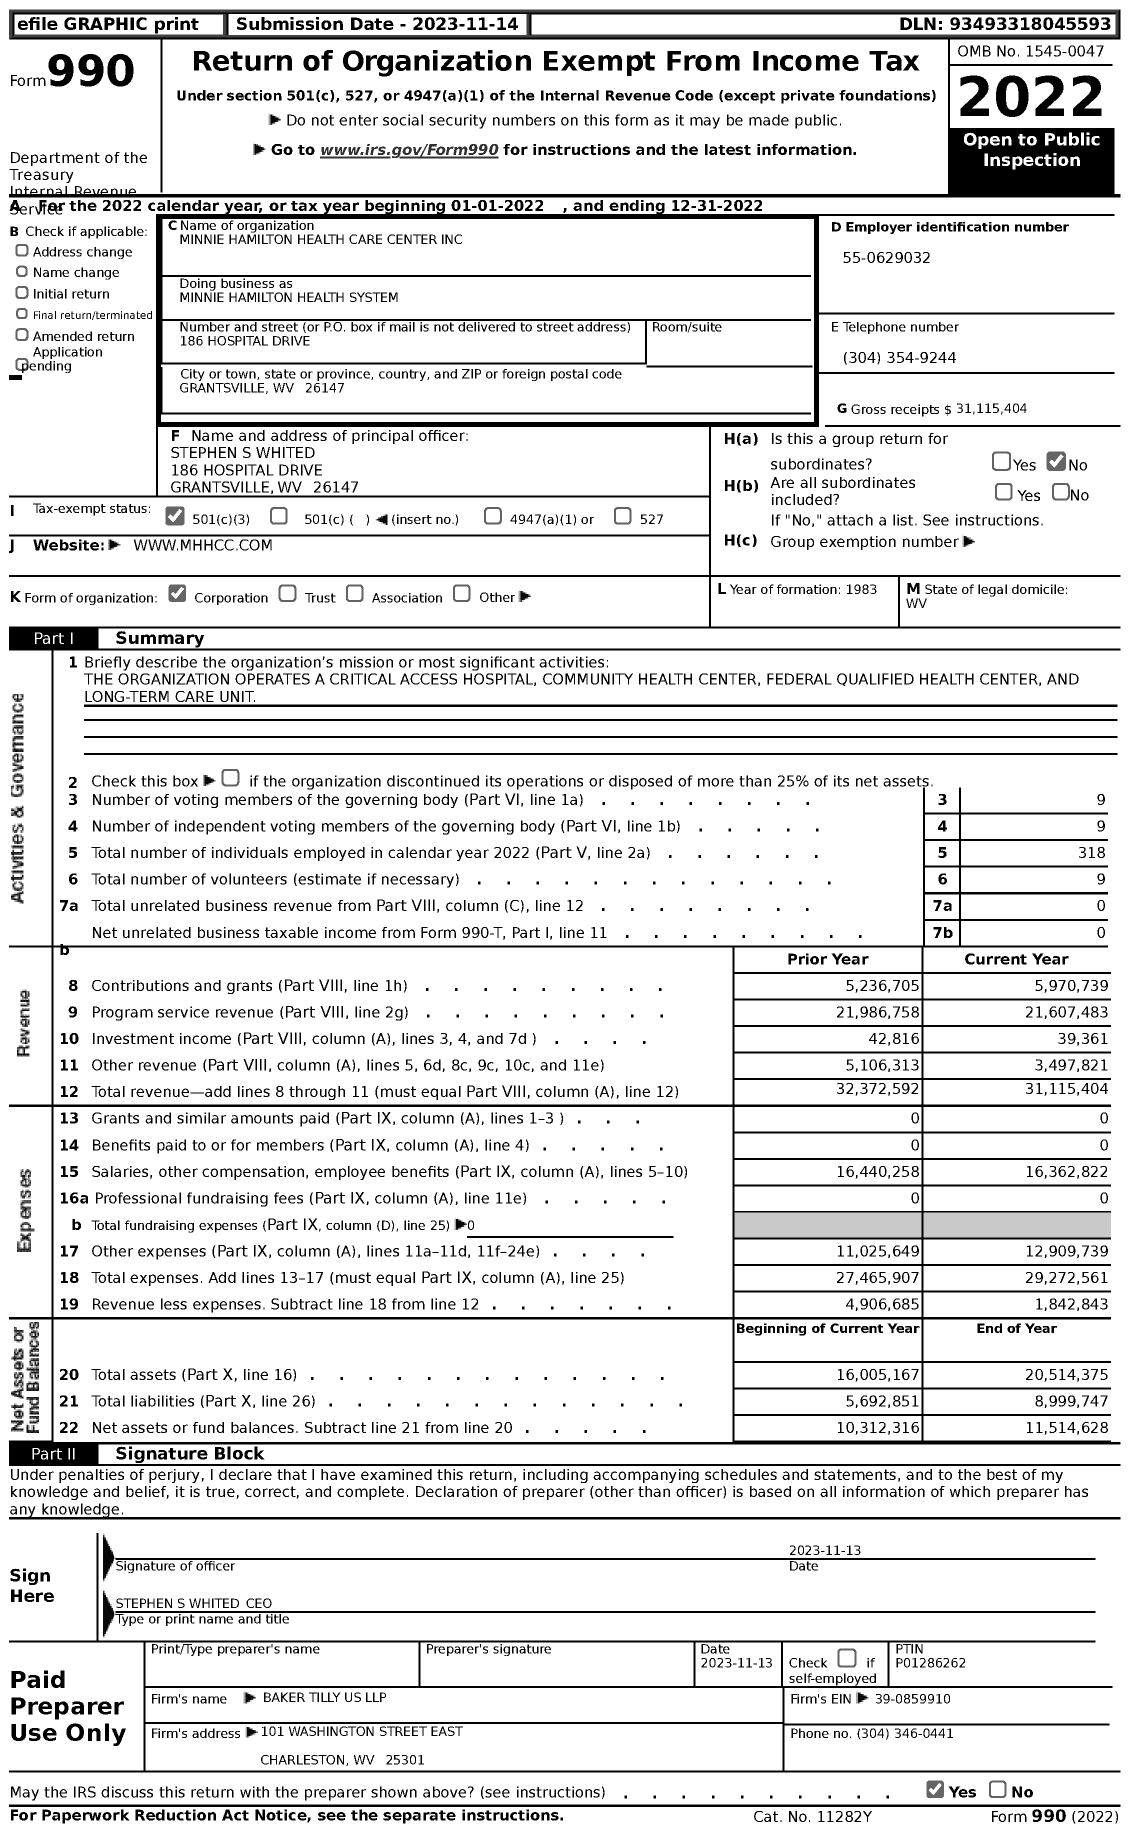 Image of first page of 2022 Form 990 for Minnie Hamilton Health System (MHHS)